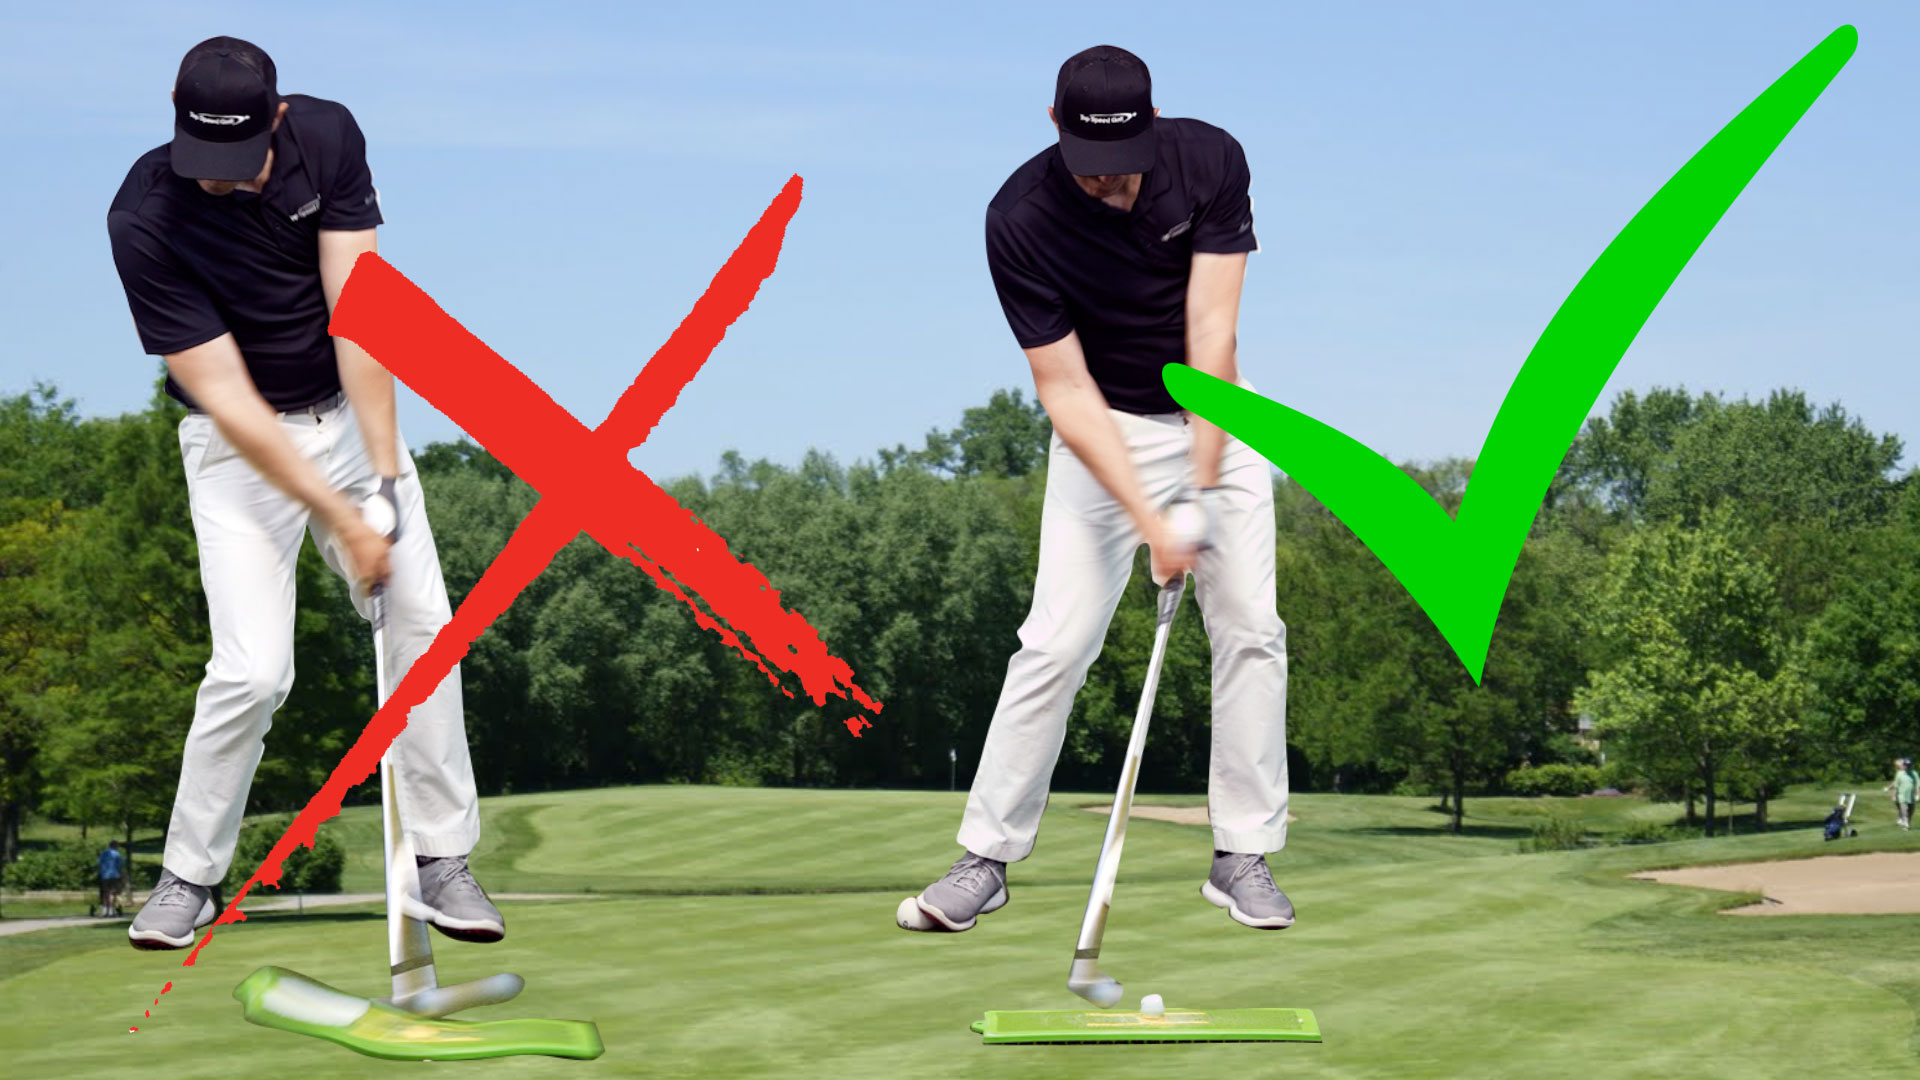 How to Get Through the Golf Ball | Stop Hanging Back • Top Speed Golf